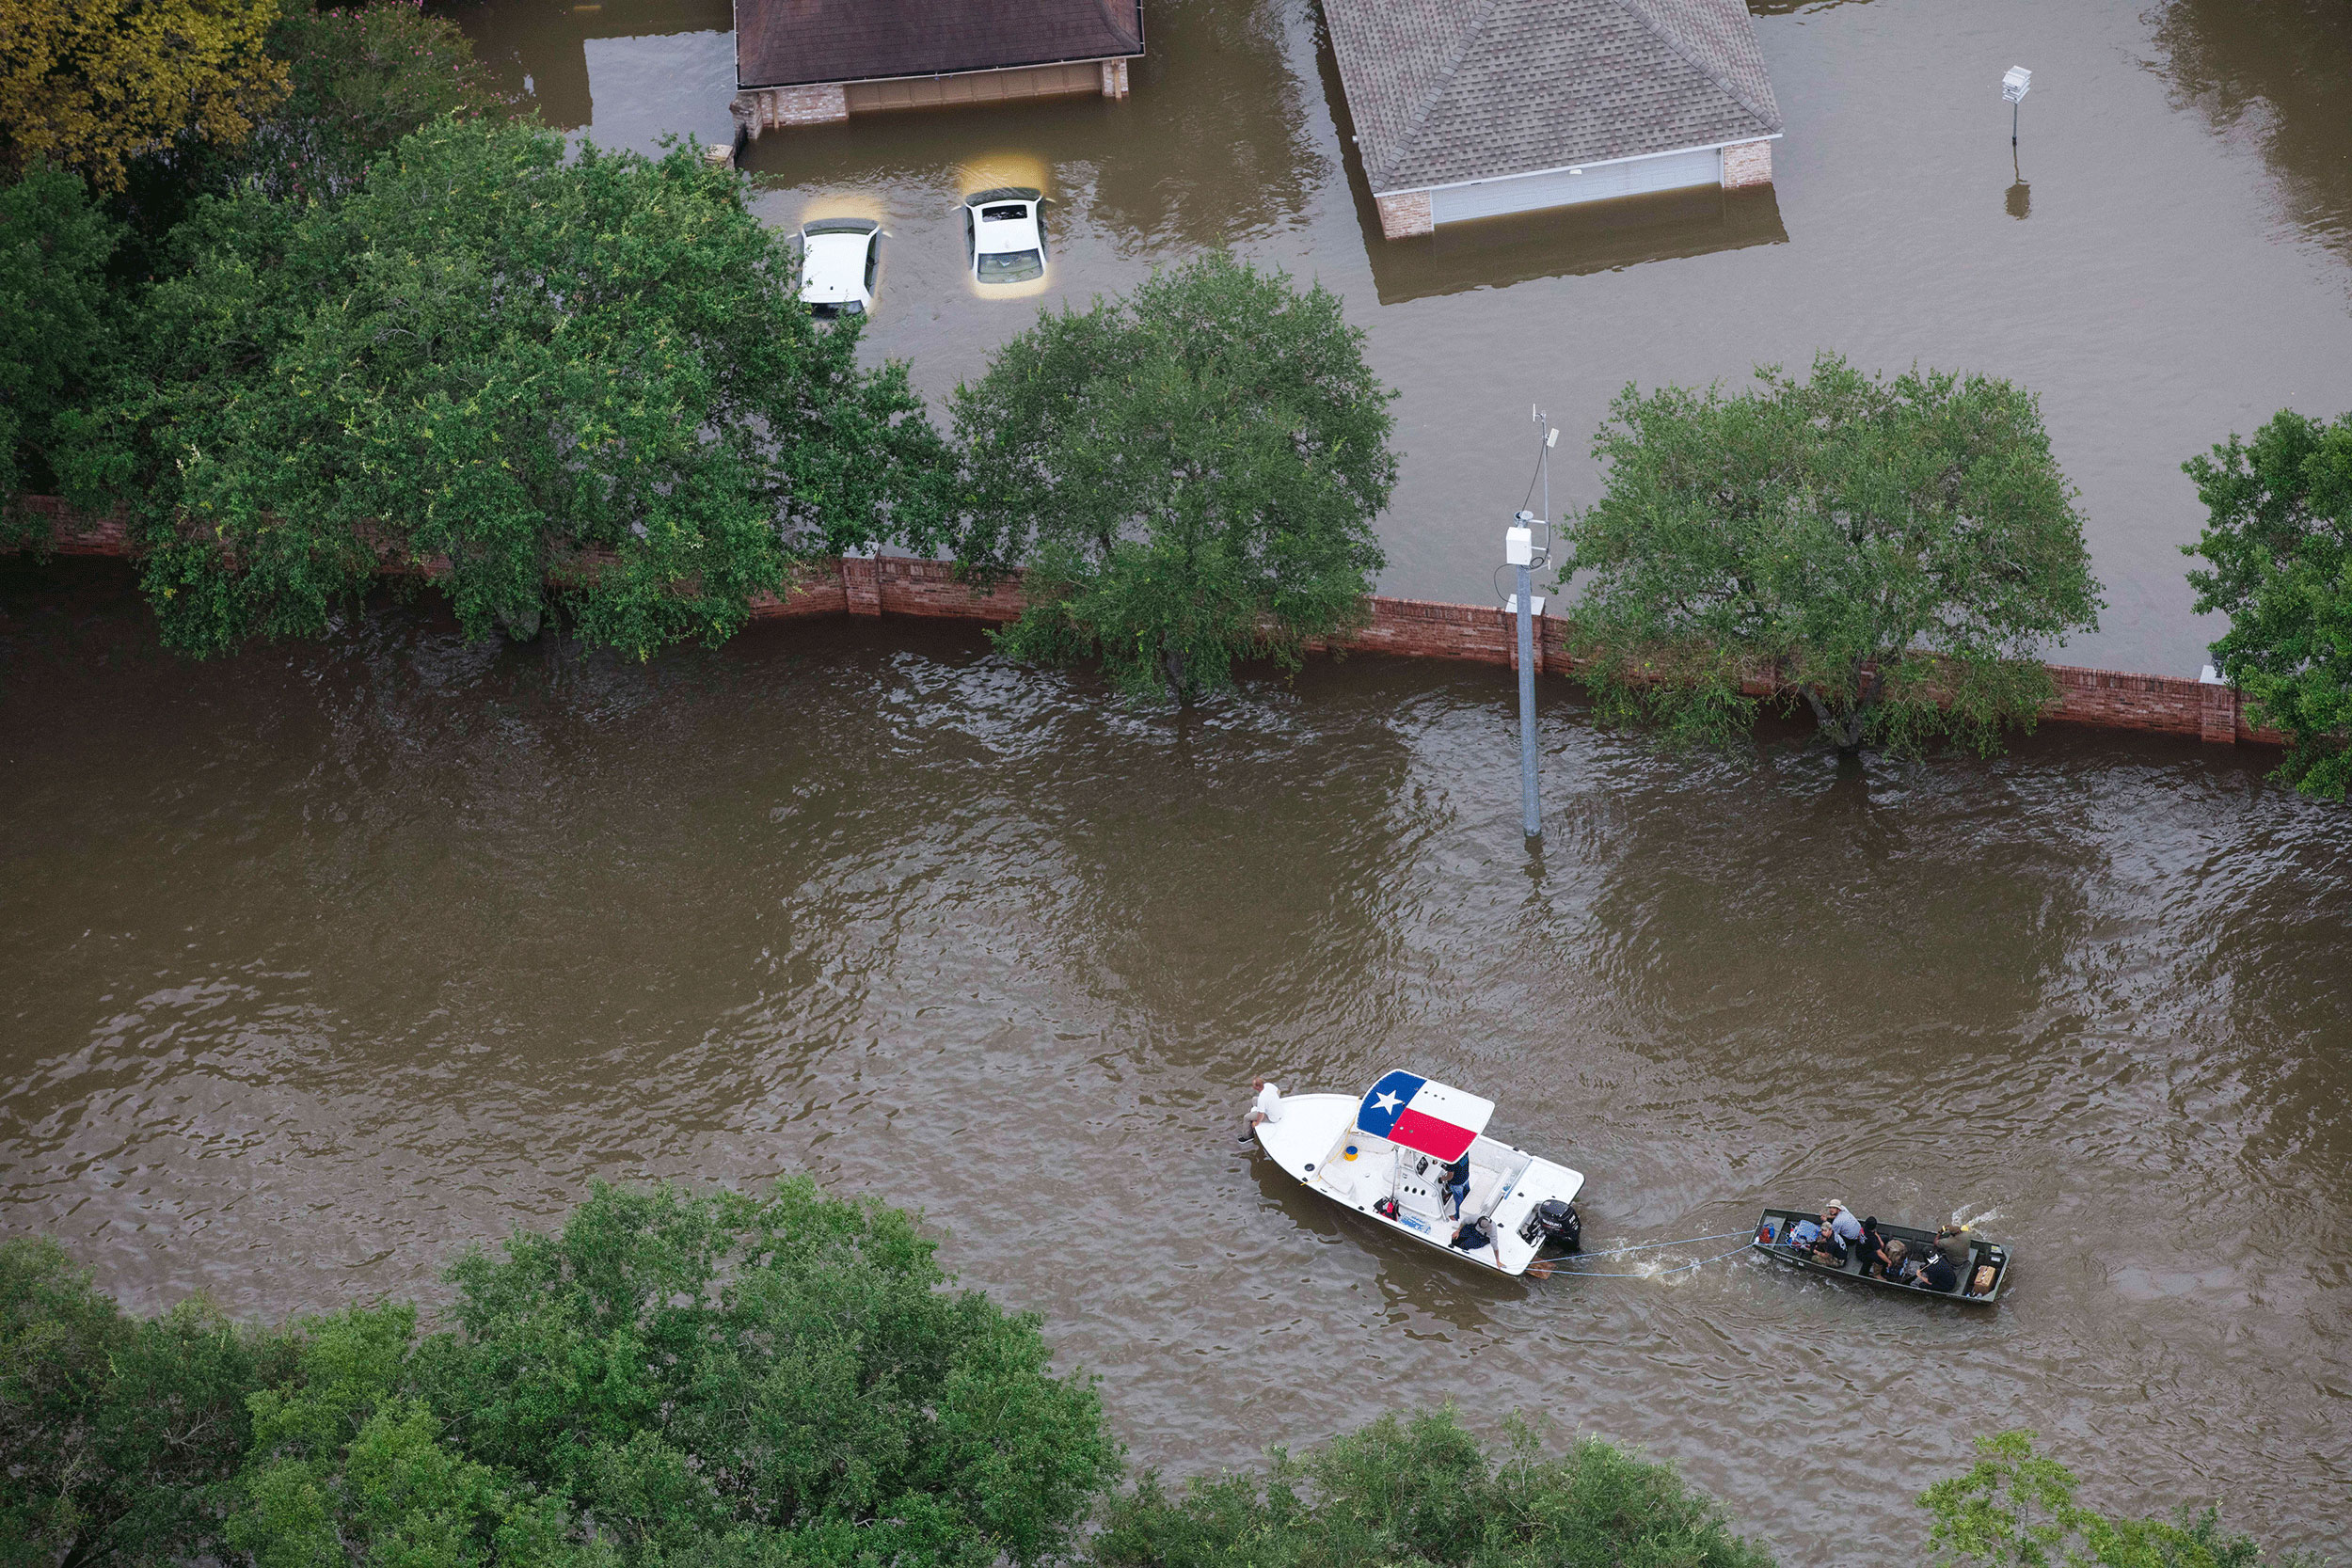 A boat with the Texas state flag on the roof tows another boat.